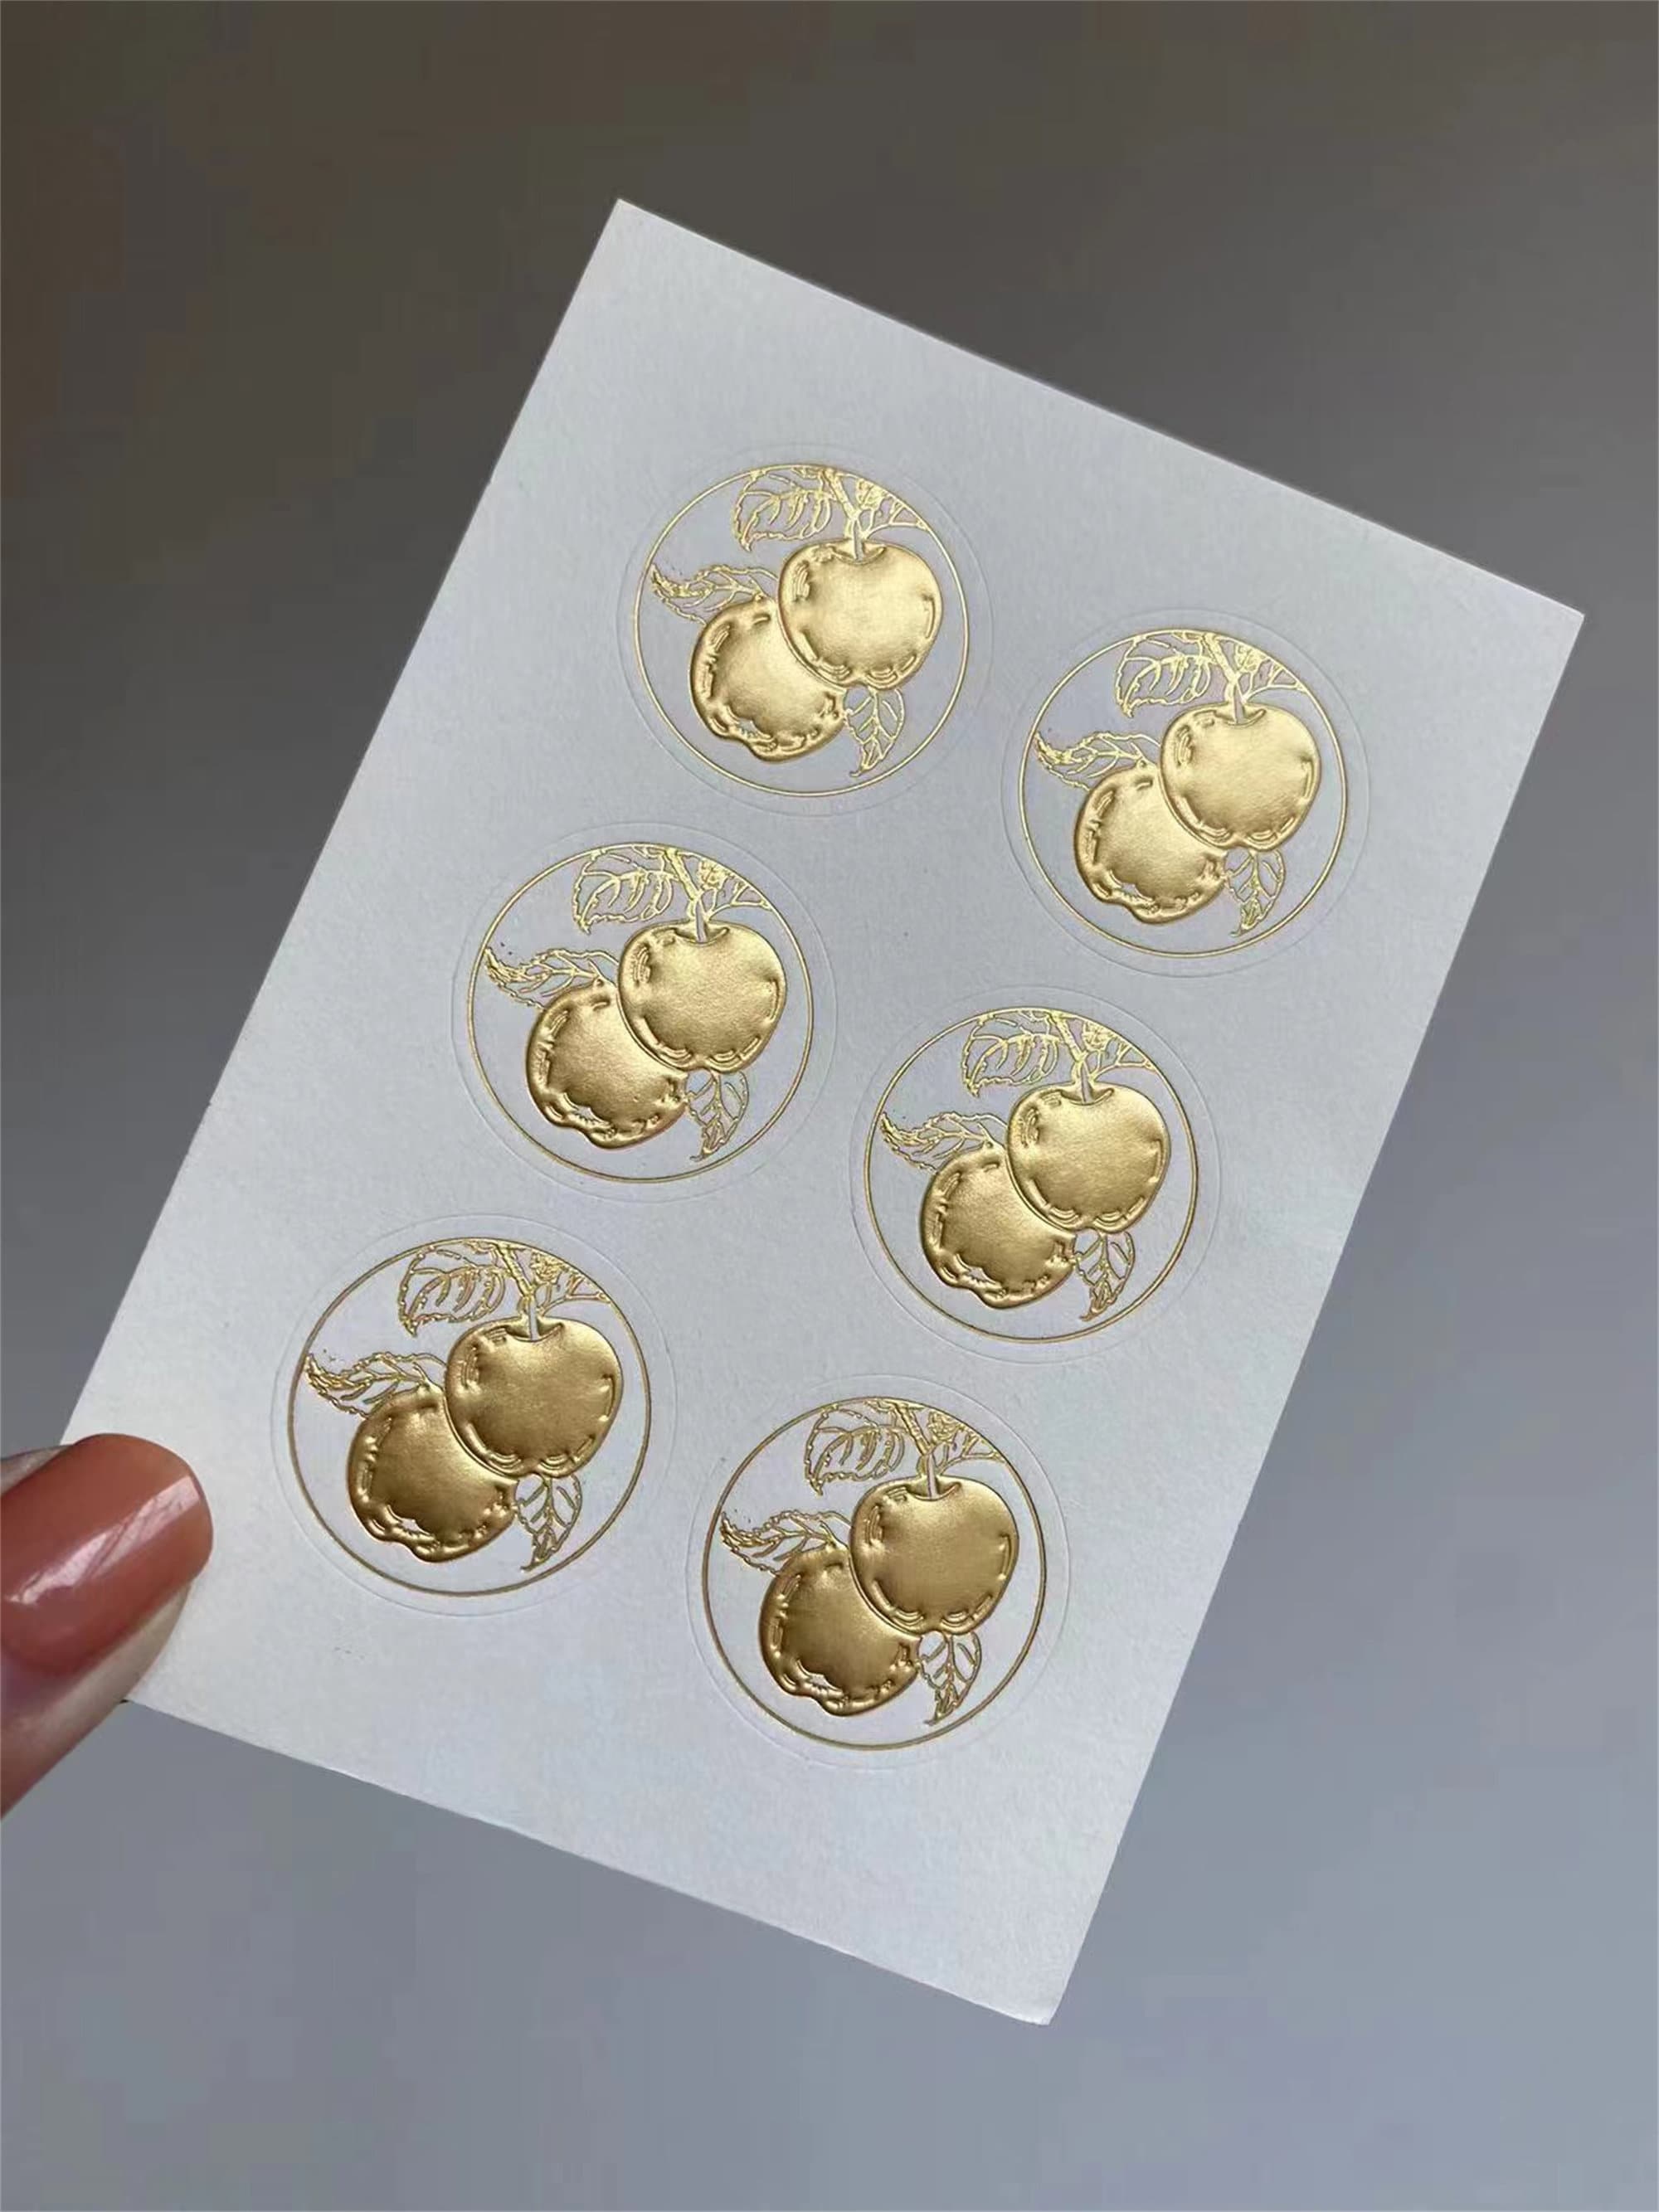 Gold Foil Seals, Box of 40 2 Round Gold Stickers, Blank Metallic